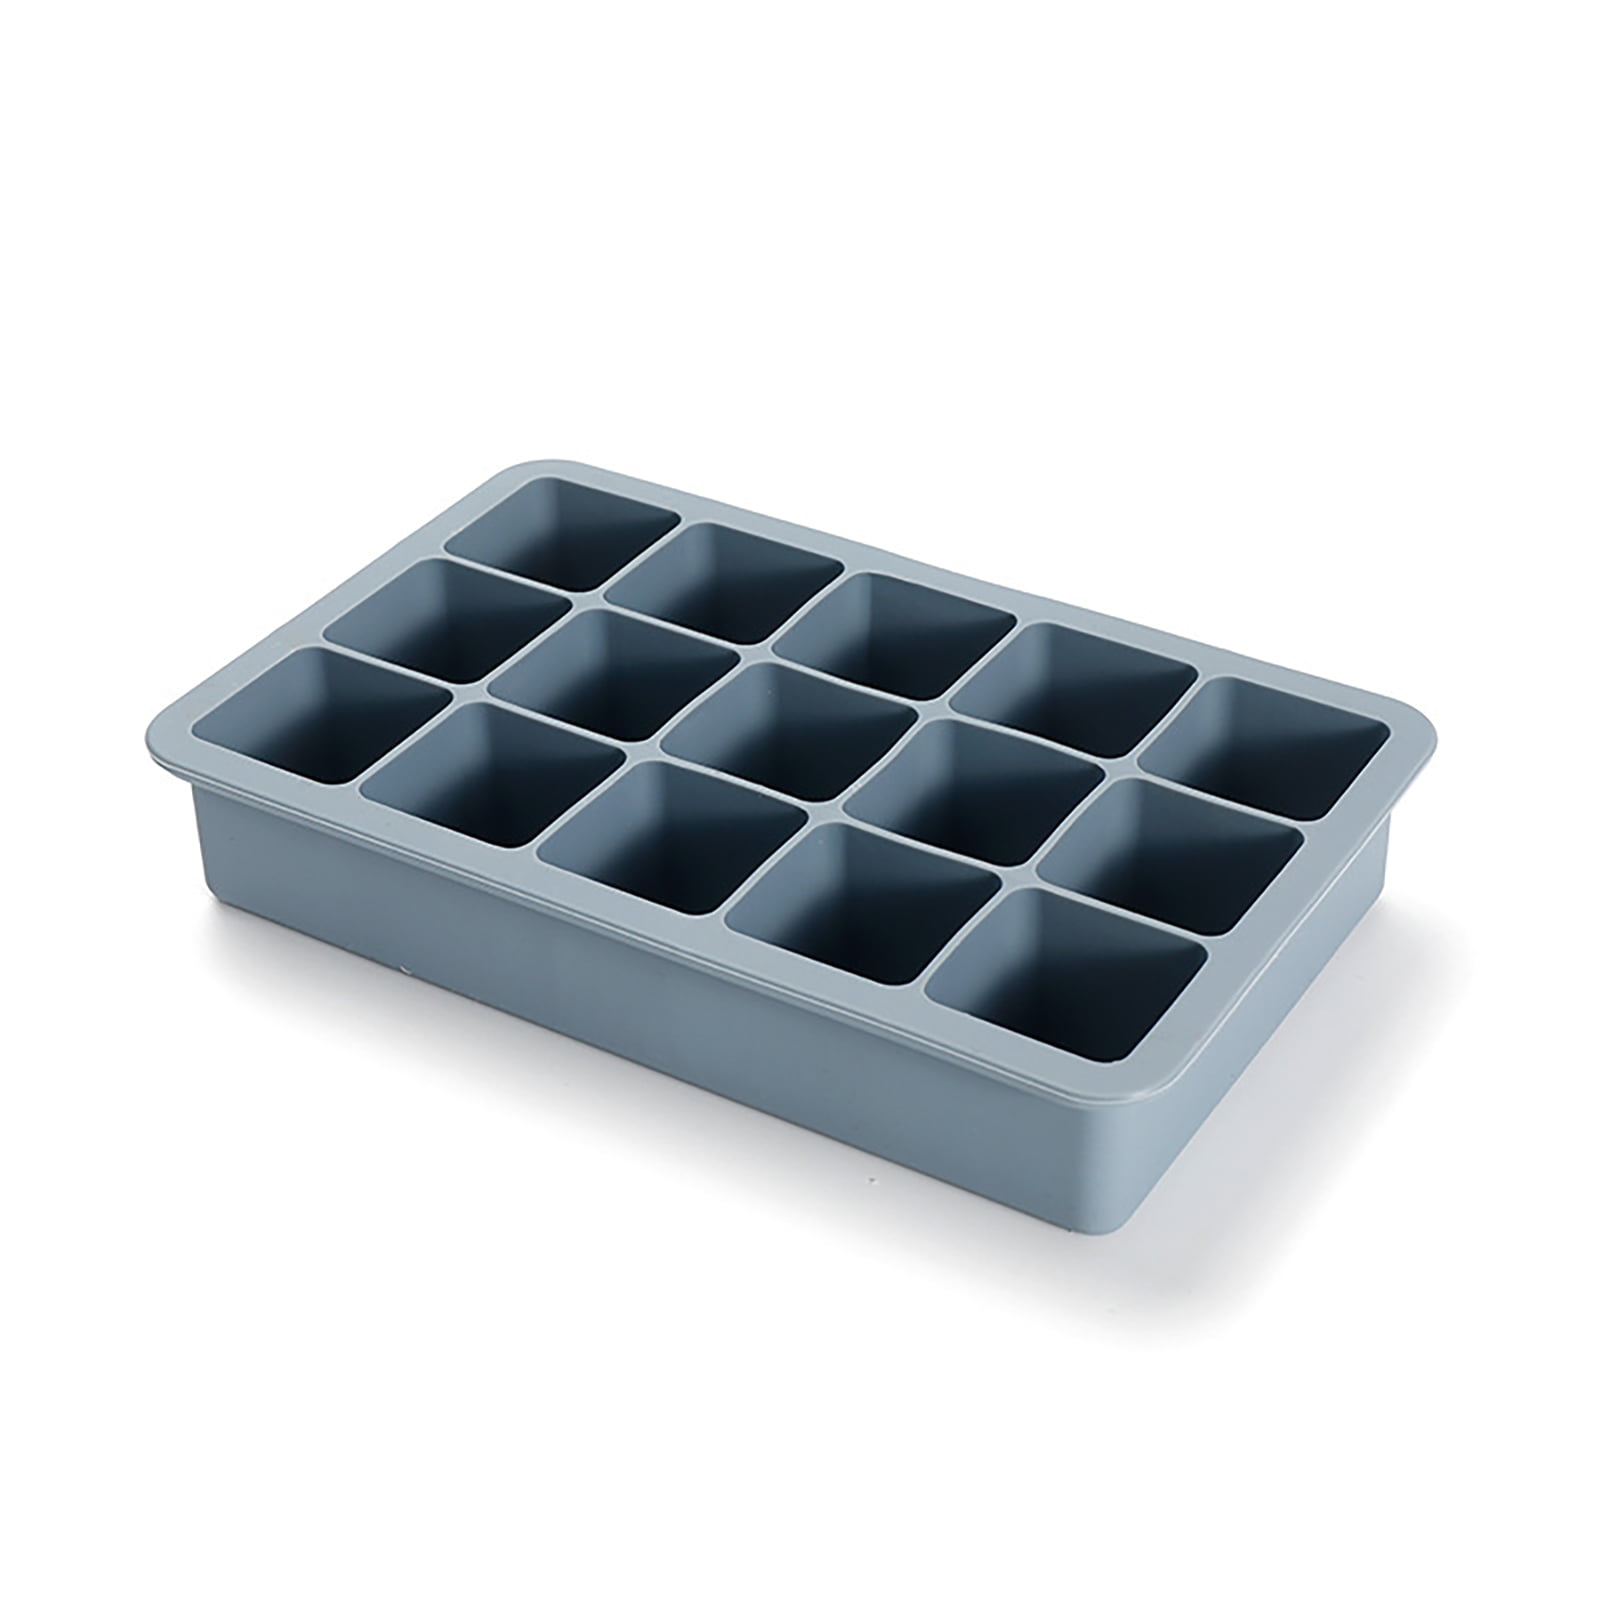 Practical 15 Gird Square Ice Tray Mold Frozen Maker Big Ice Cube Tray Bar Maker 